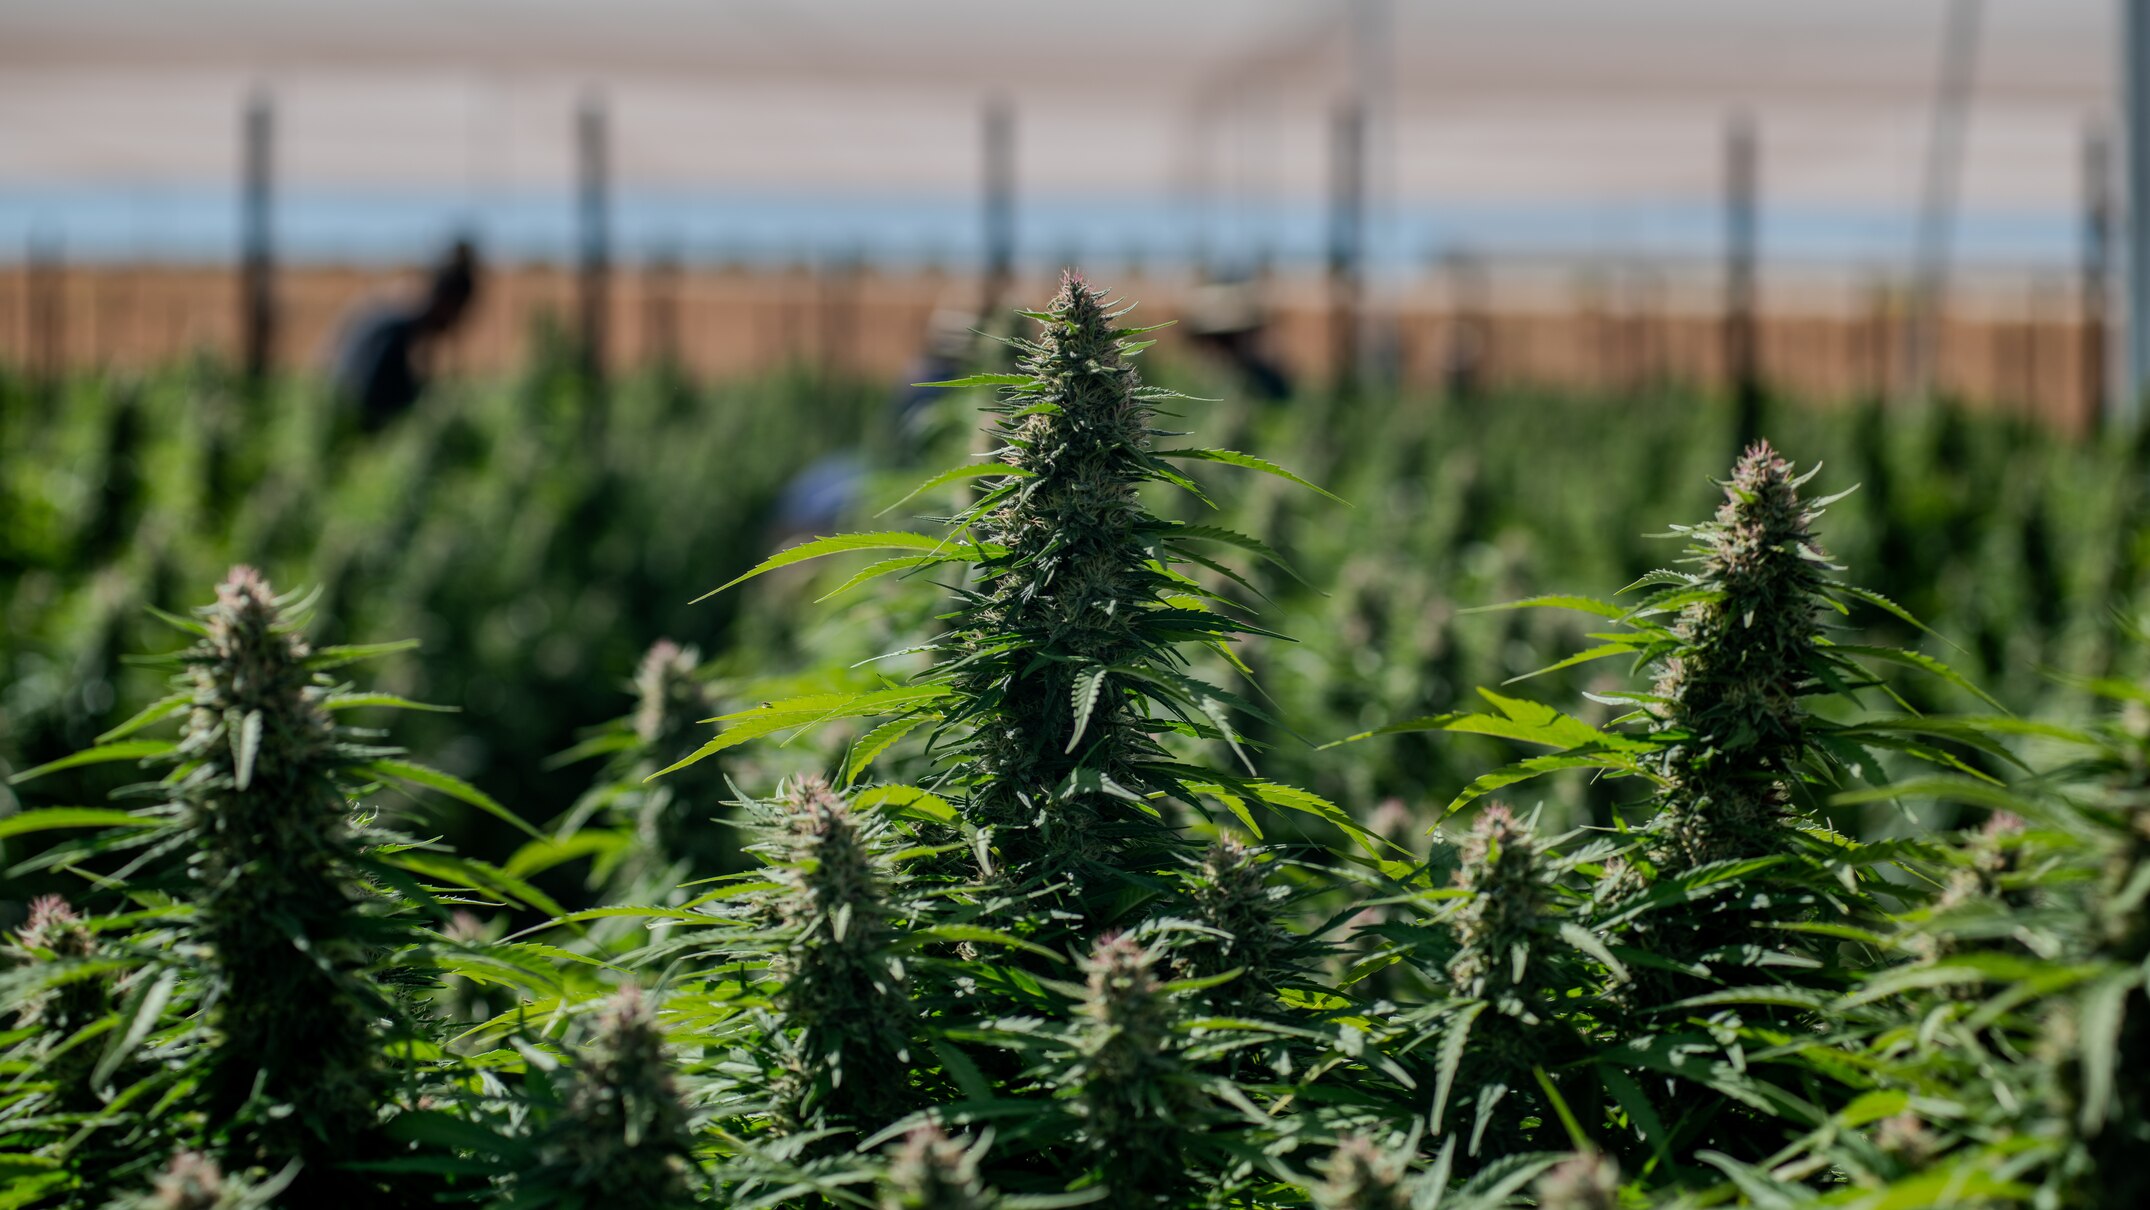 citrus grower invests in one of australia's largest outdoor medicinal cannabis facilities